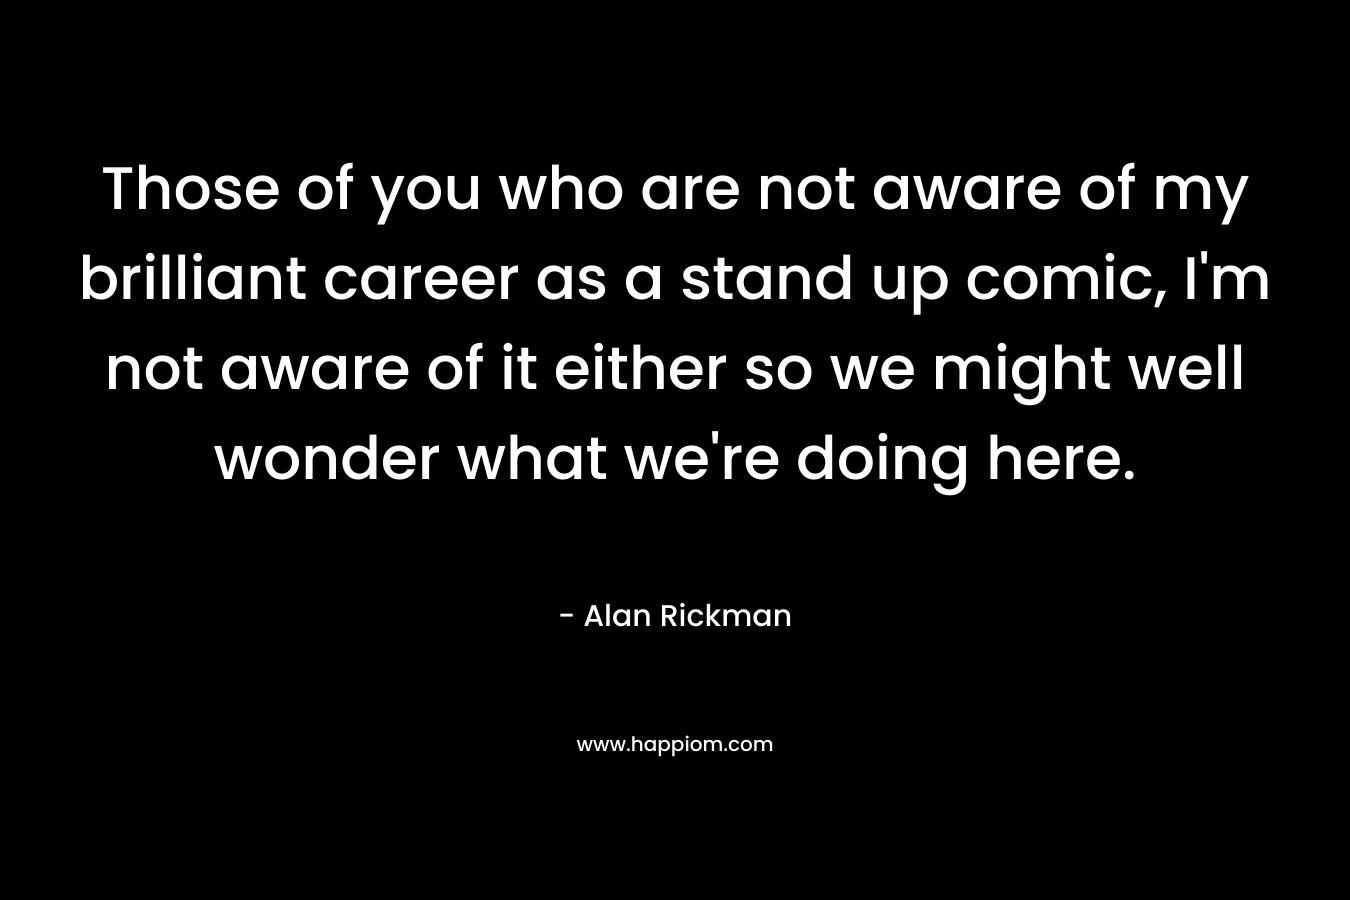 Those of you who are not aware of my brilliant career as a stand up comic, I’m not aware of it either so we might well wonder what we’re doing here. – Alan Rickman